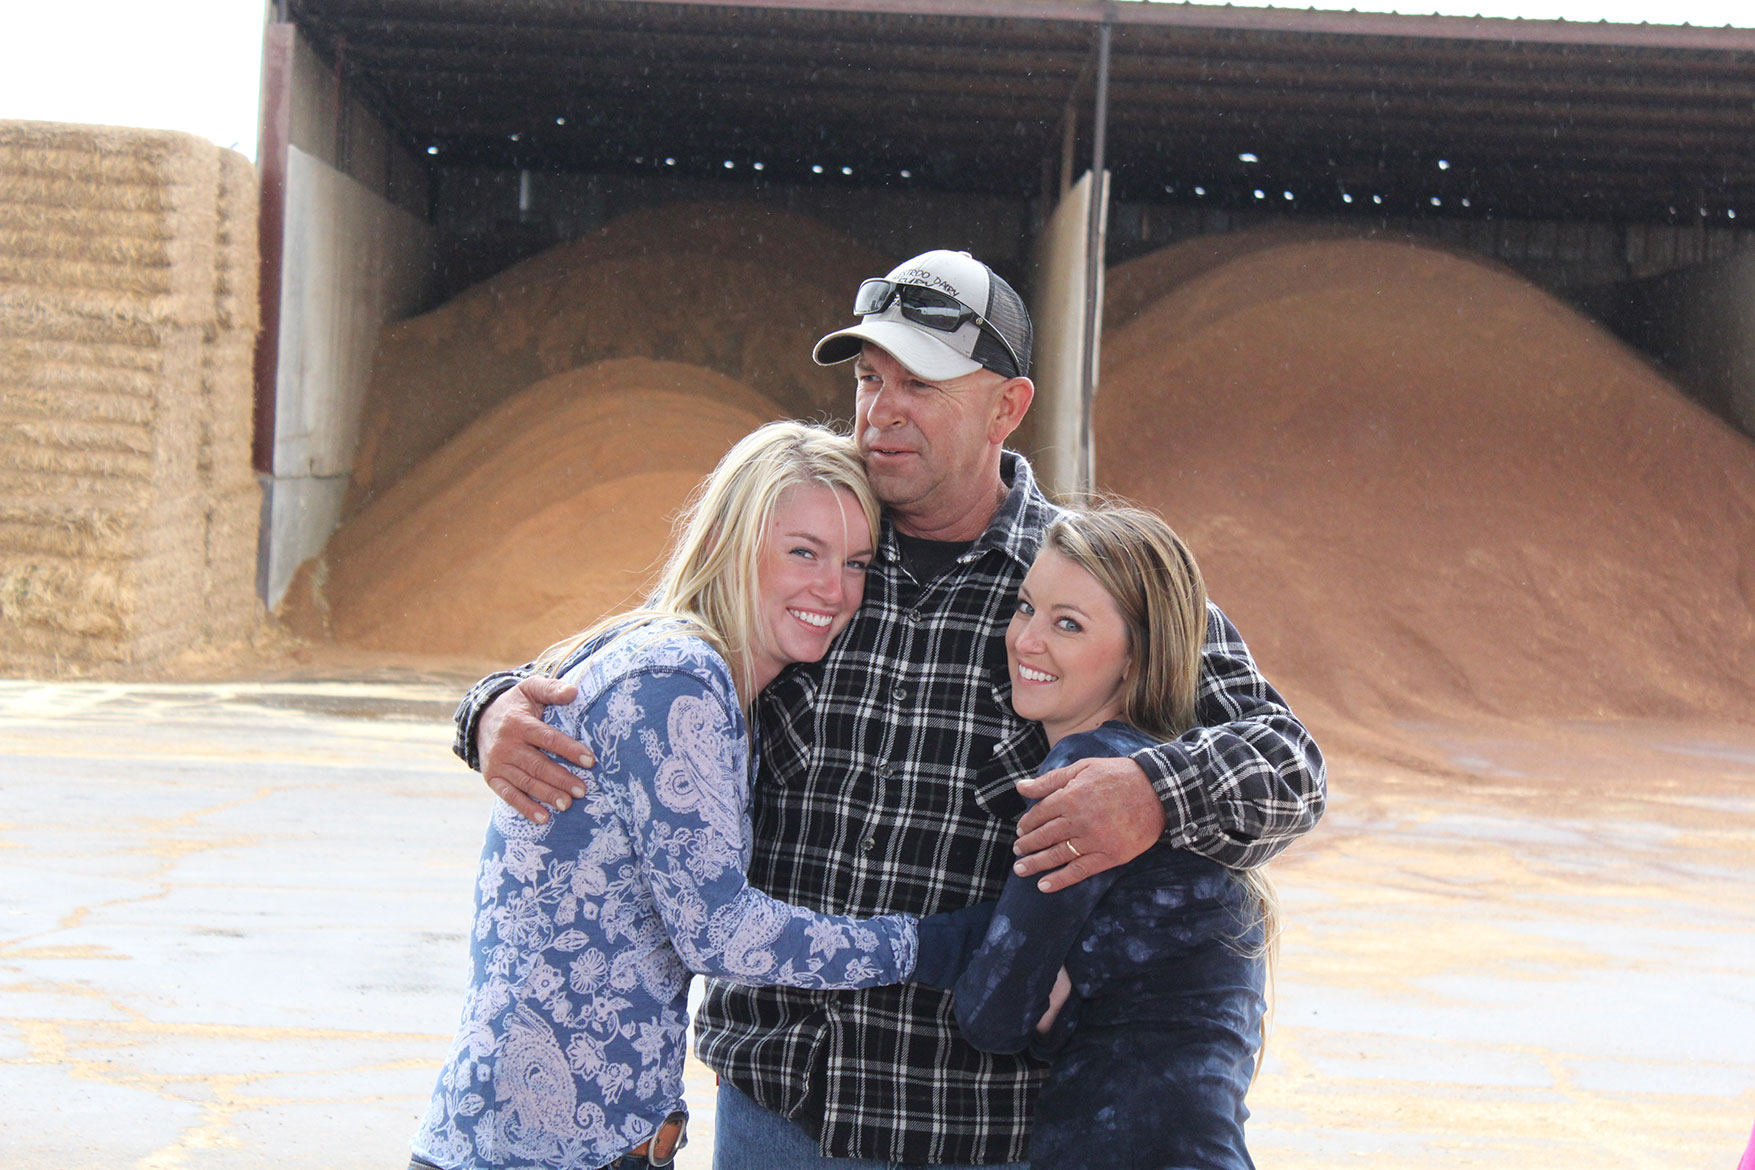 Lexie and Tara give their dad a hug in front of the feed ingredients for the herd.